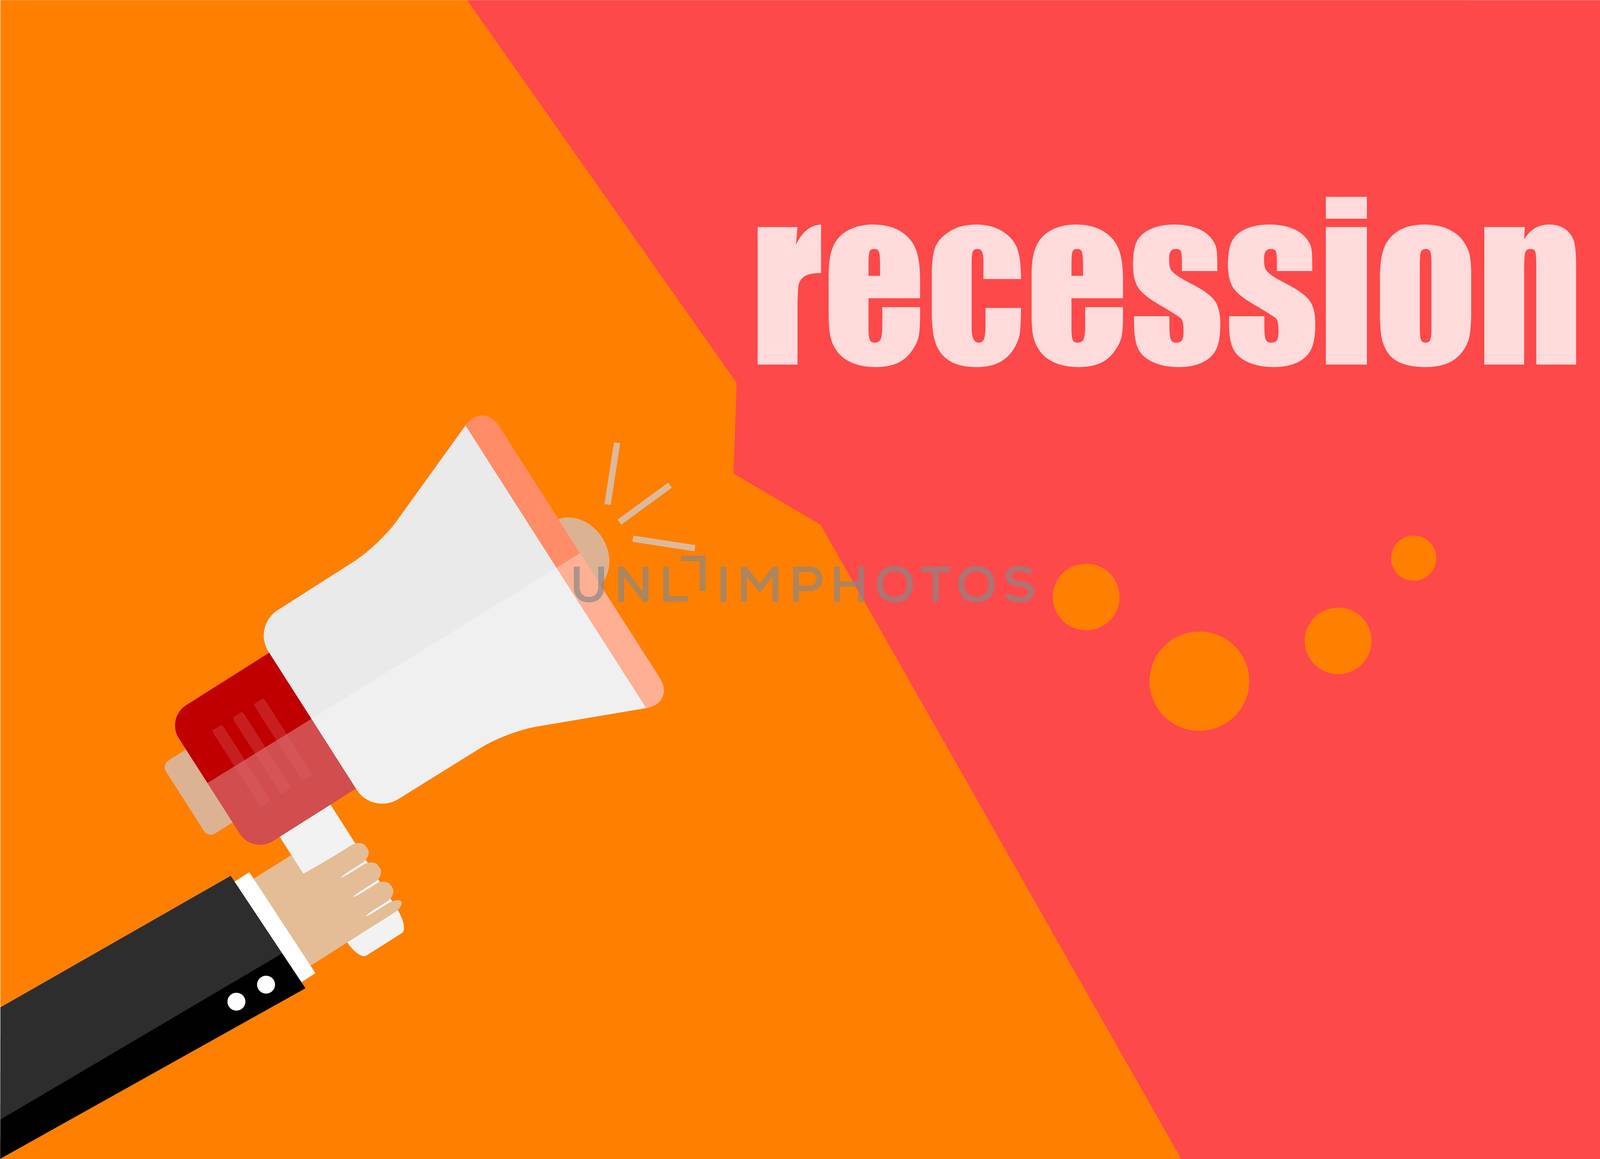 recession. Flat design business concept Digital marketing business man holding megaphone for website and promotion banners